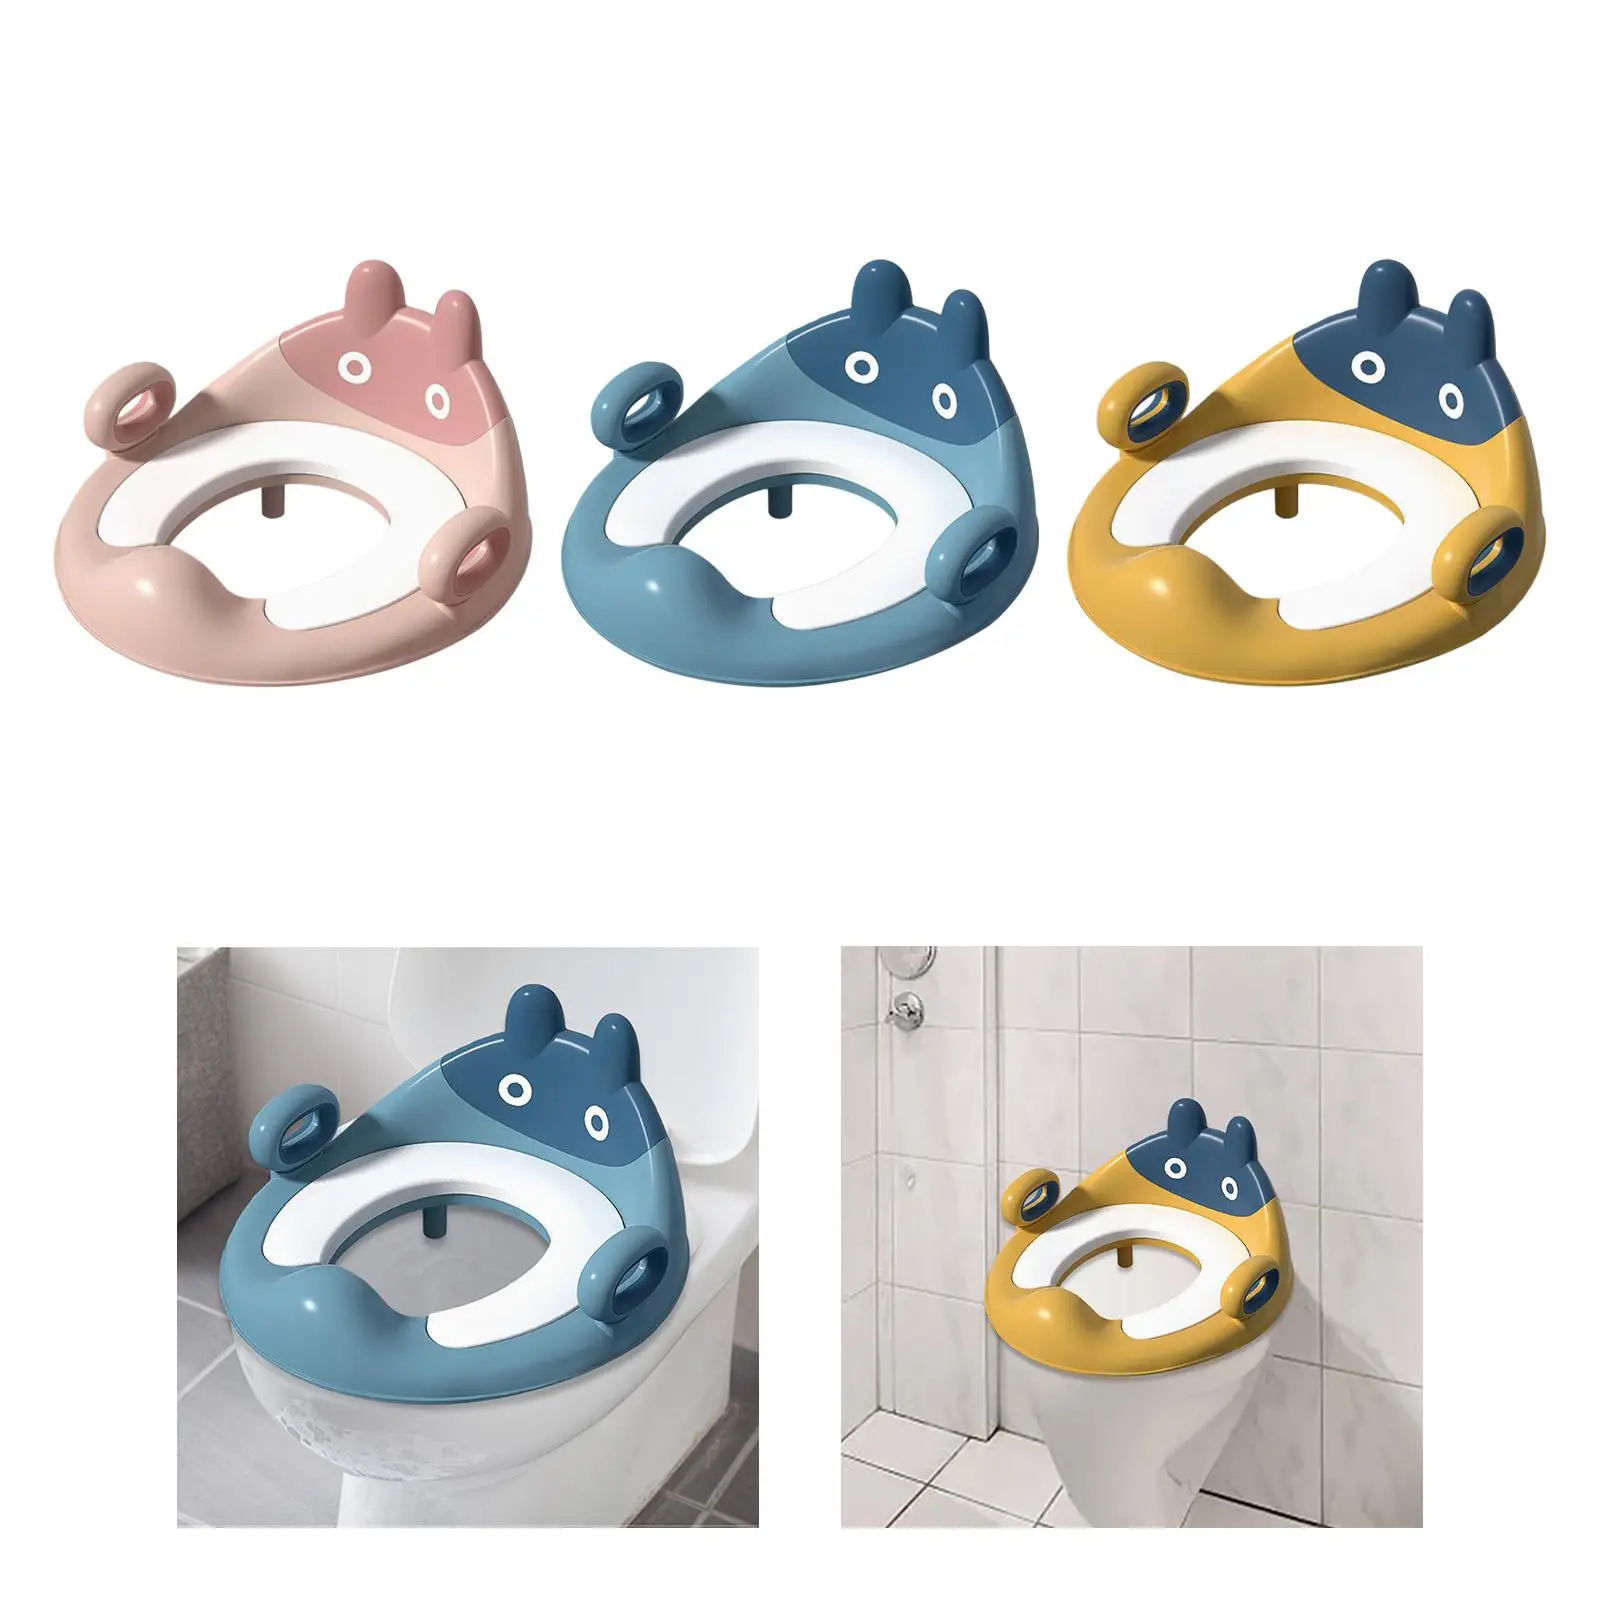 Potty Train Seat Fits Most Toilets Comfortable with Guard Potty Seat Training Toilet for Kids for Boy and Girl Children Kids